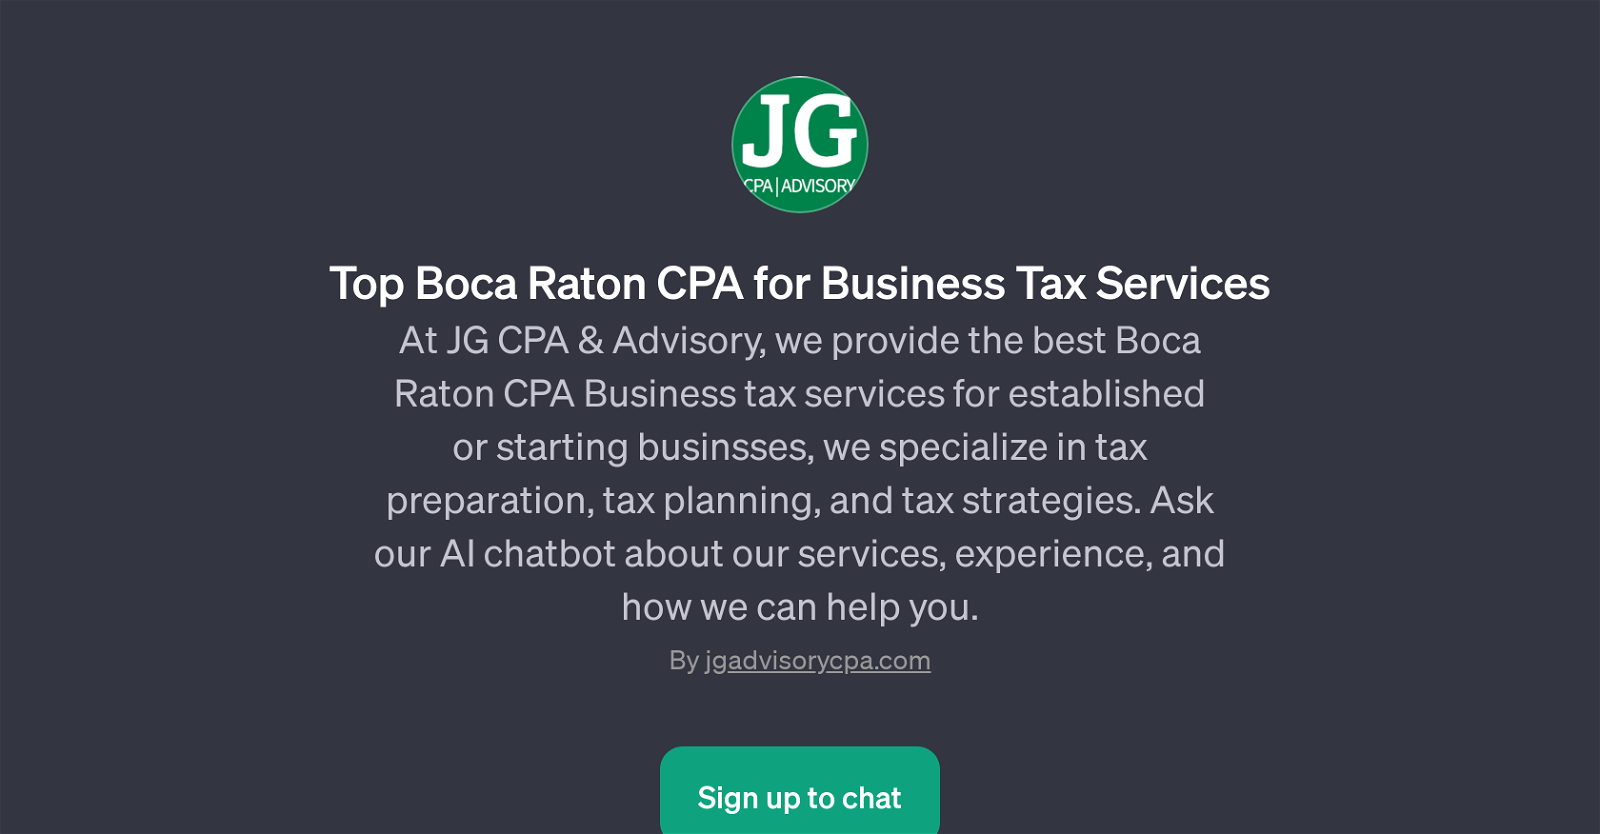 Top Boca Raton CPA for Business Tax Services website